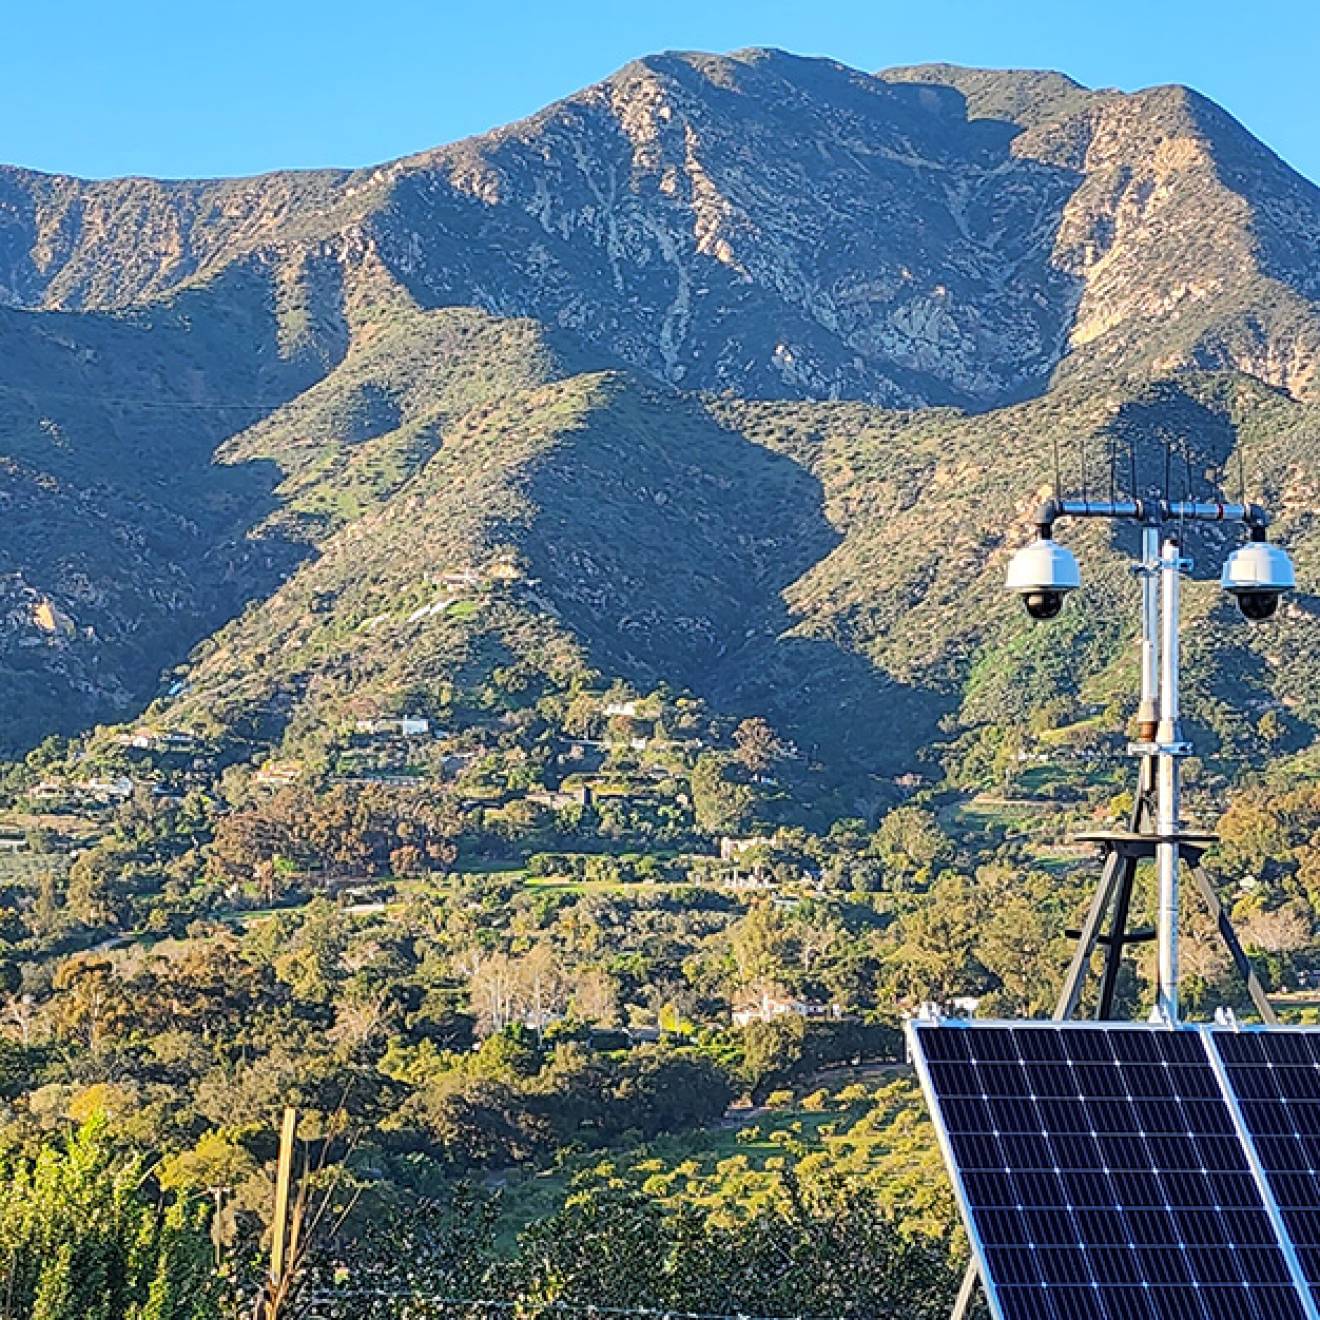 View of Ortega Ridge near Santa Barbara and cameras fitted with solar panels in the foreground